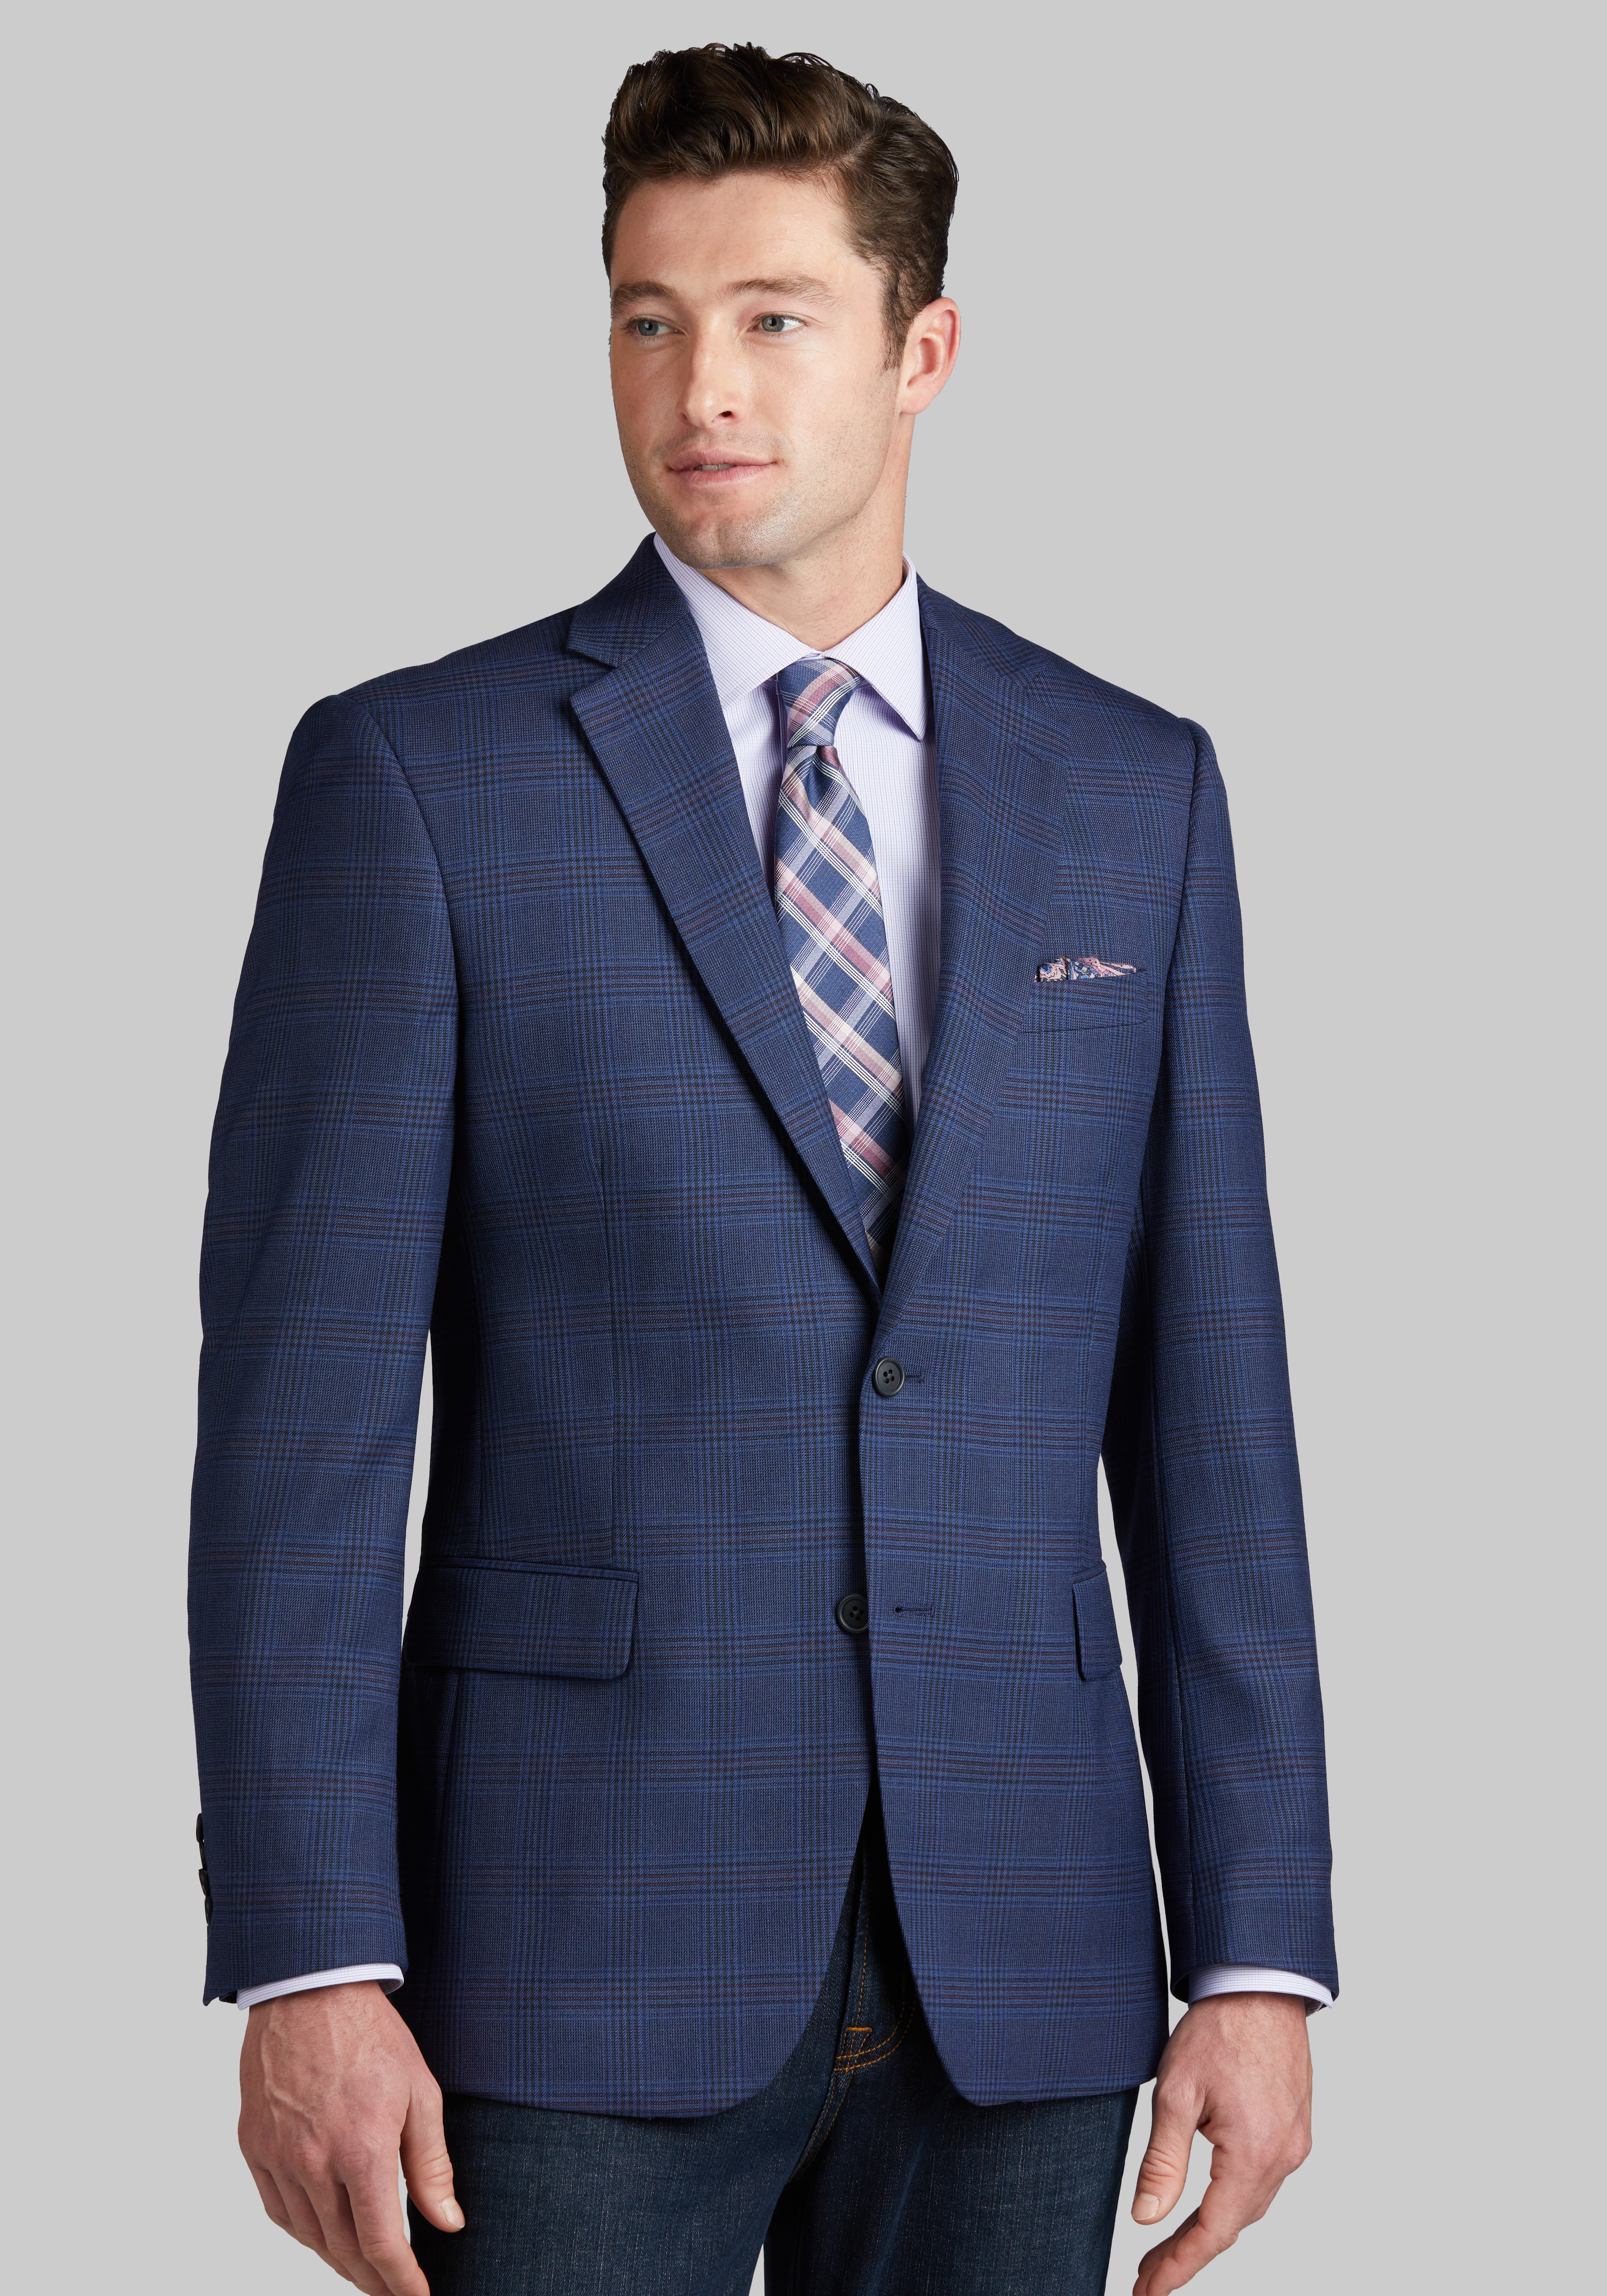 Traditional Fit Sportcoats | Men's Sportcoats | JoS. A. Bank